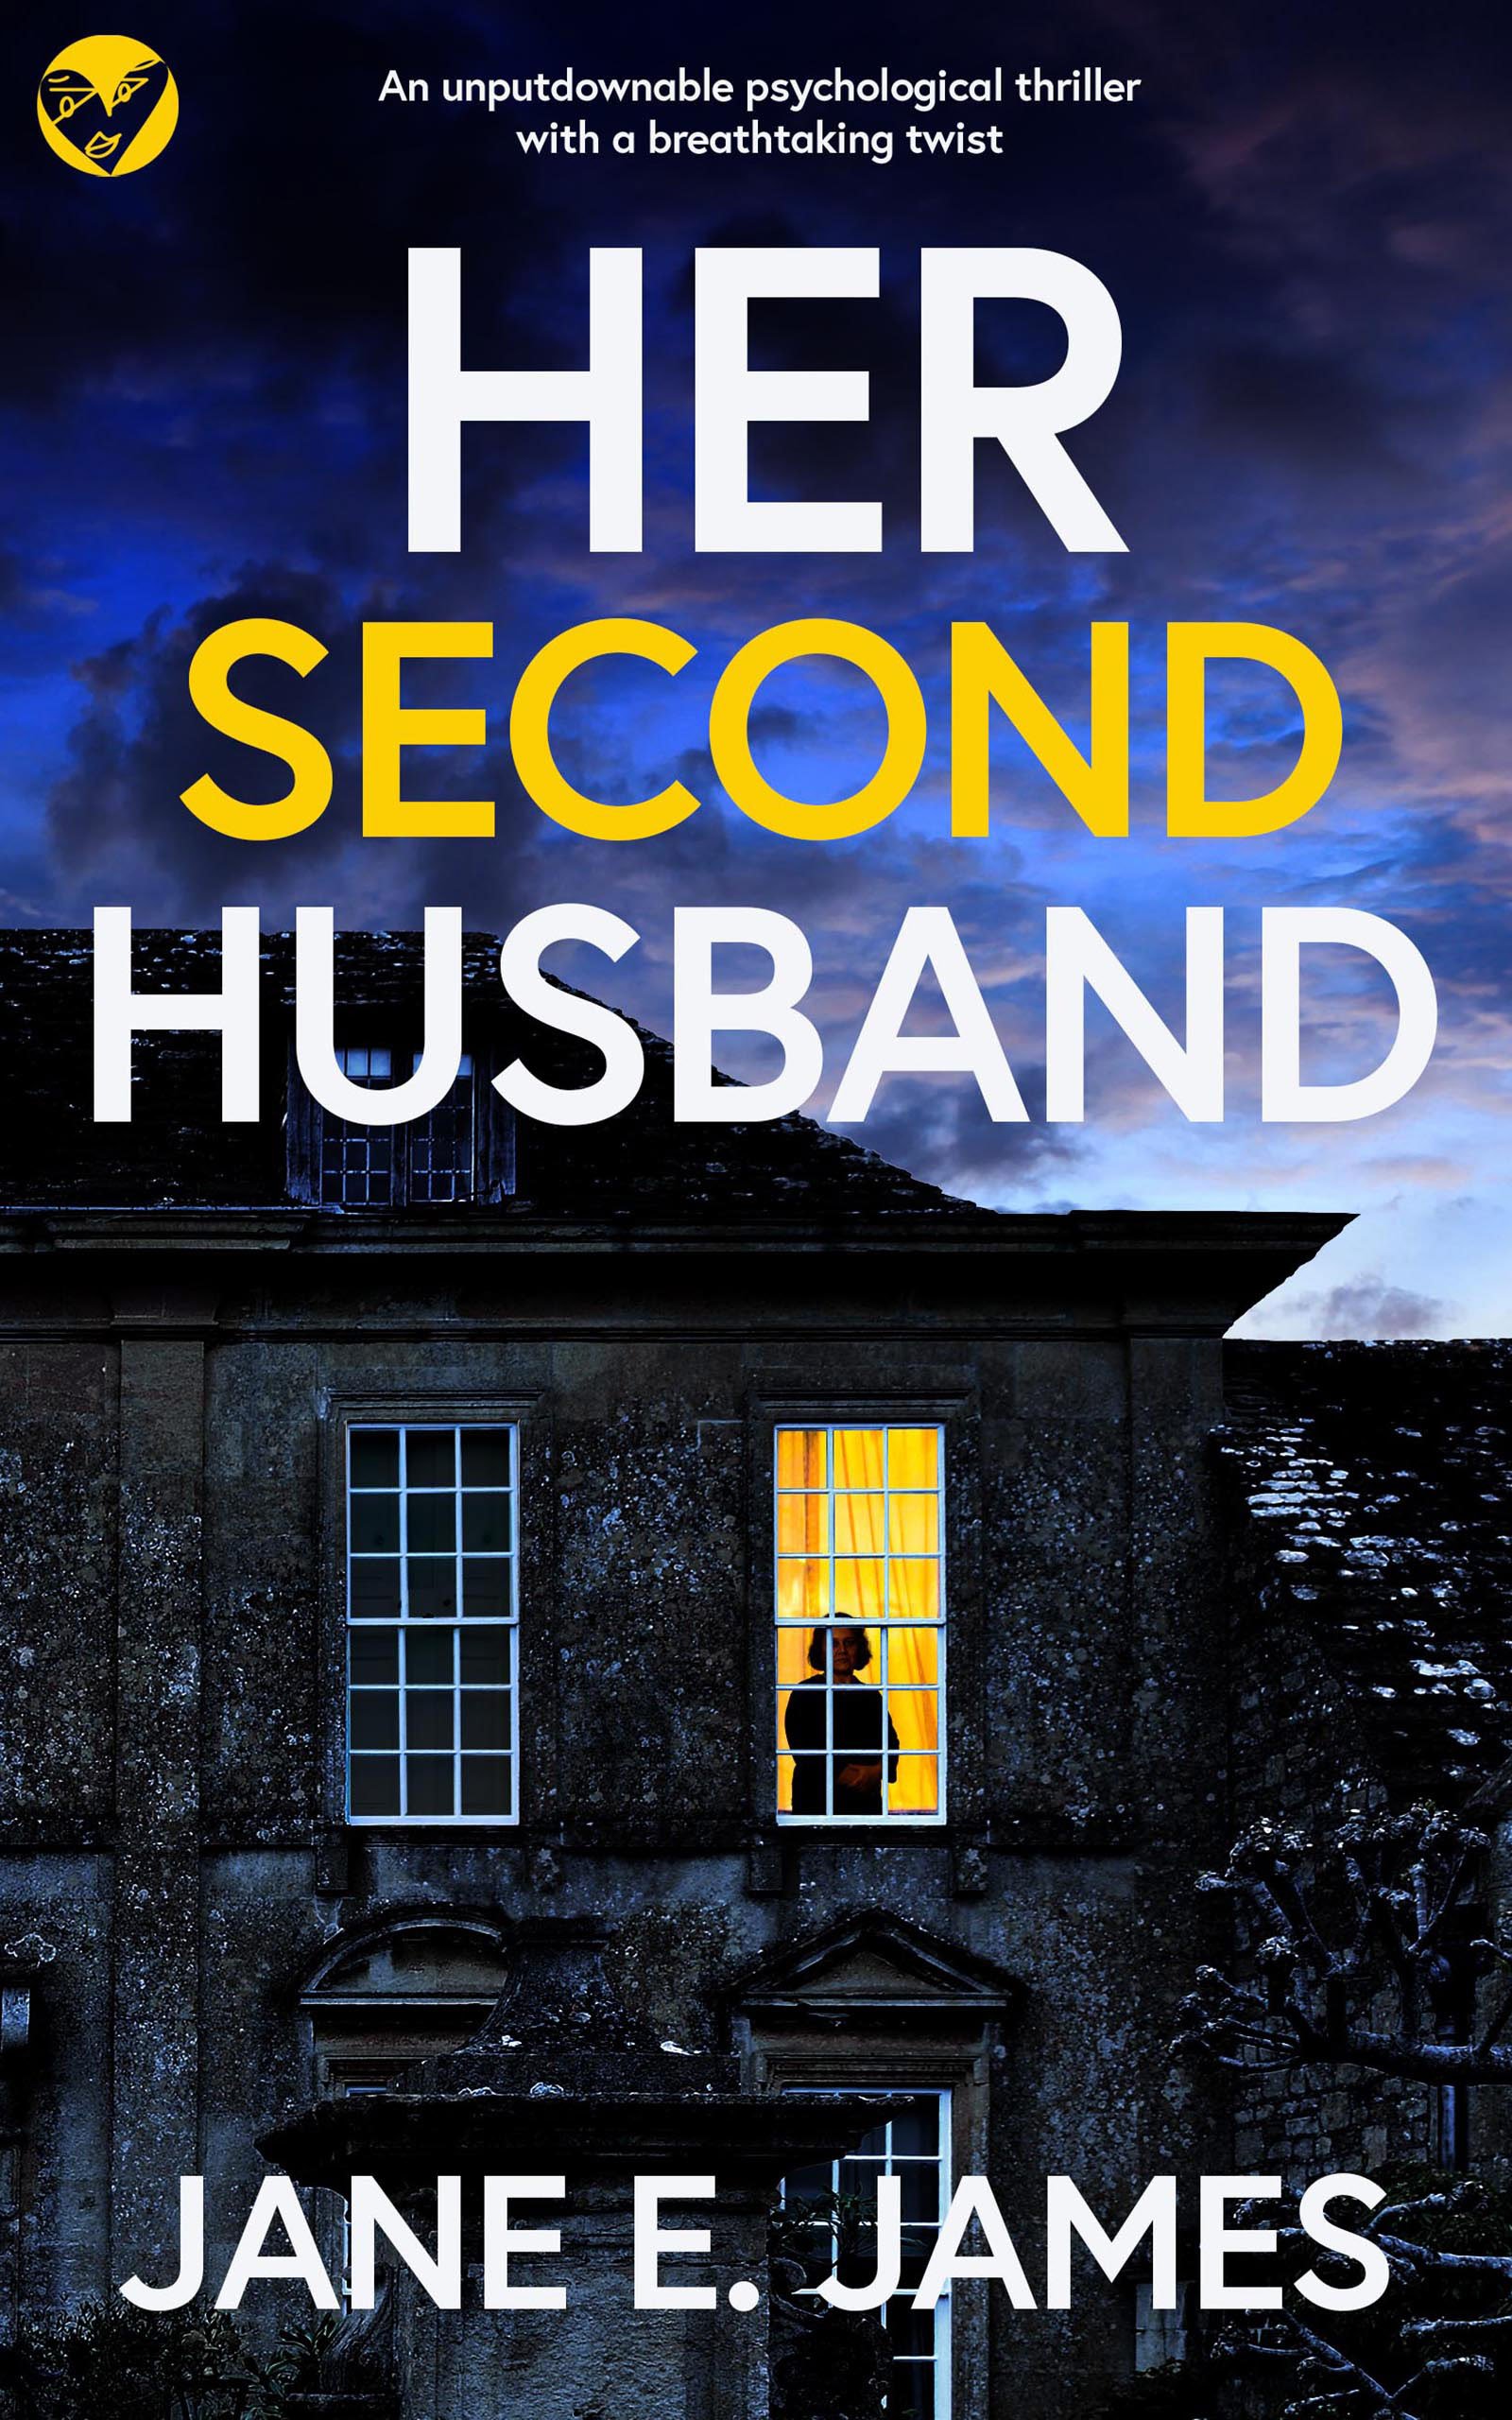 HER SECOND HUSBAND 636k cover publish.jpg